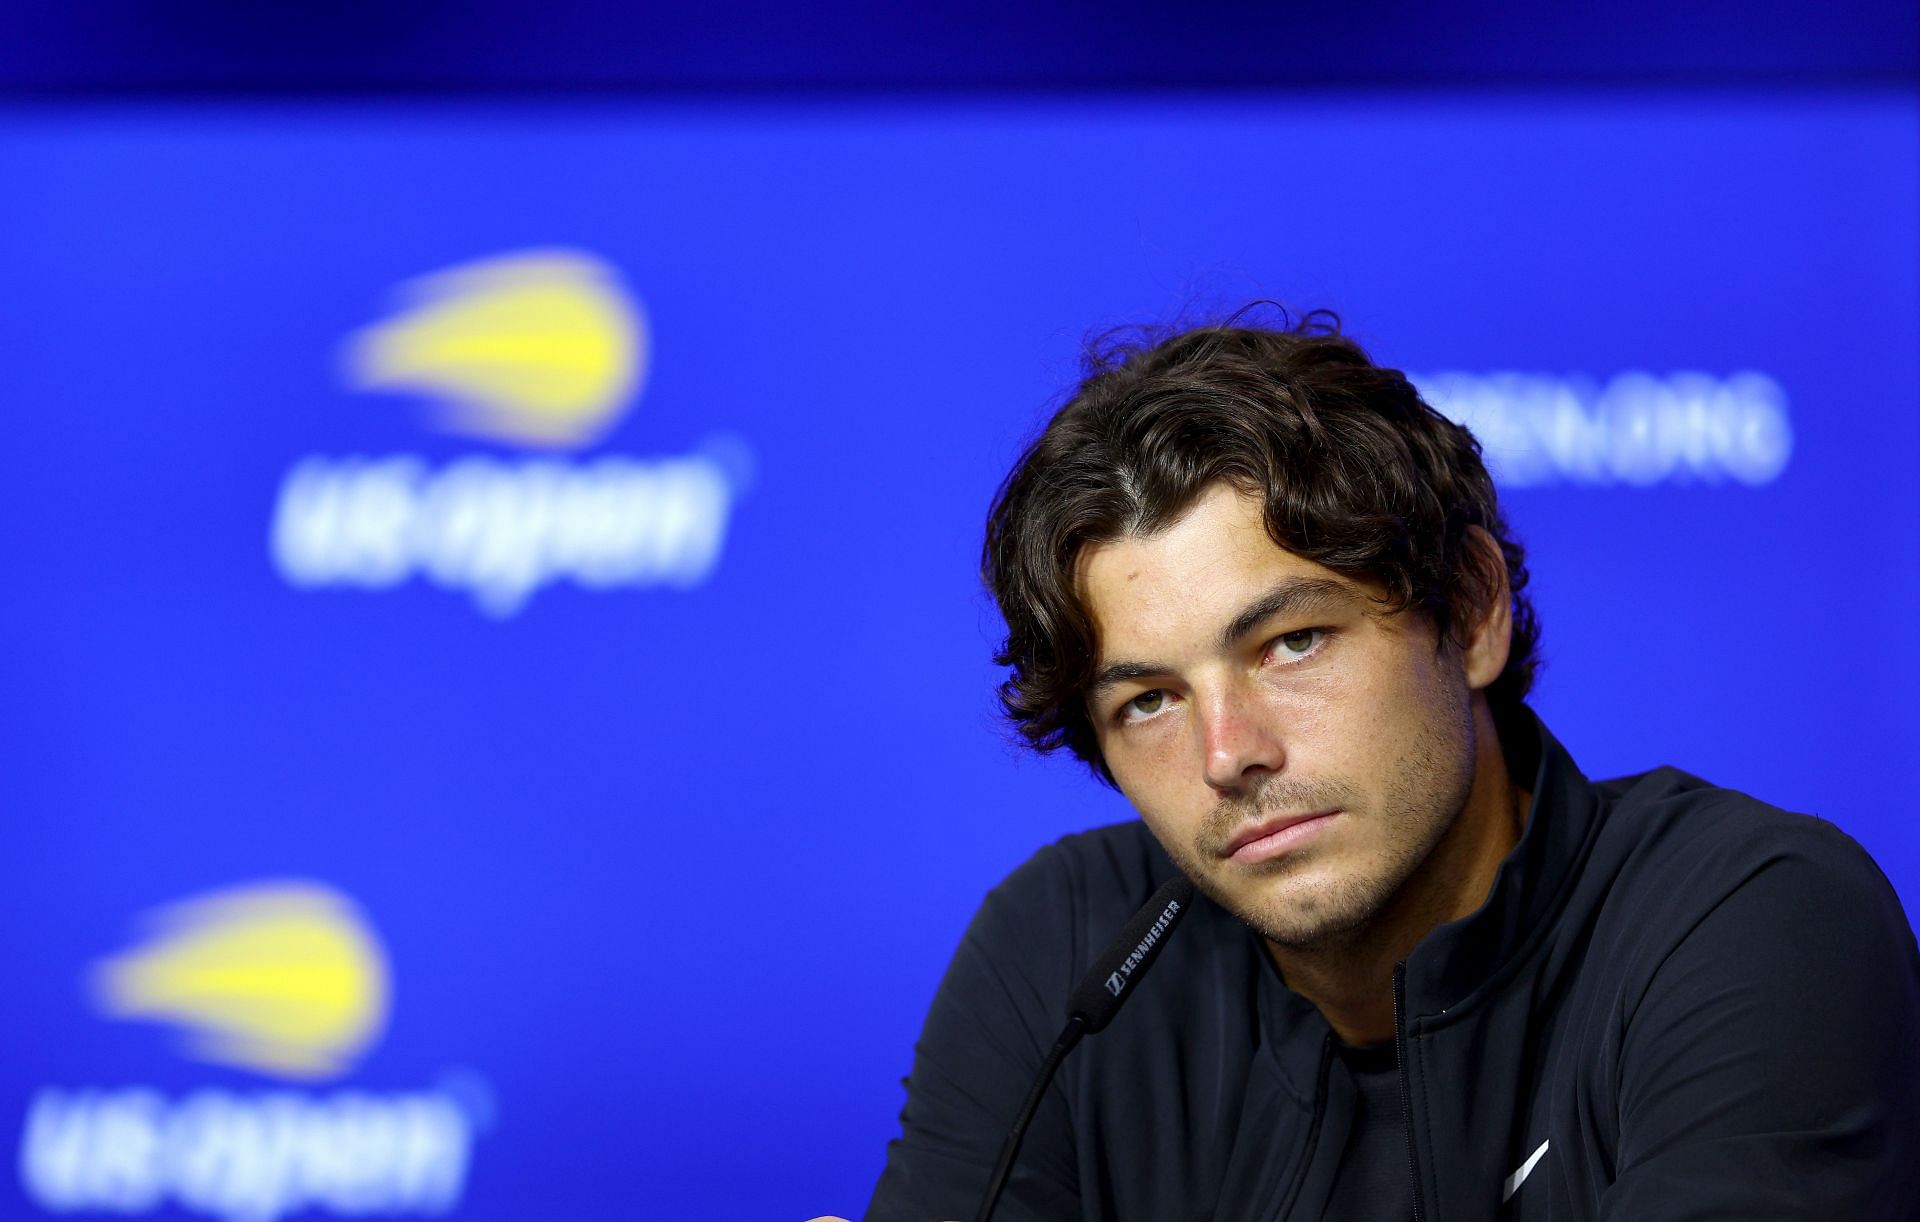 Taylor Fritz pictured at a press conference.